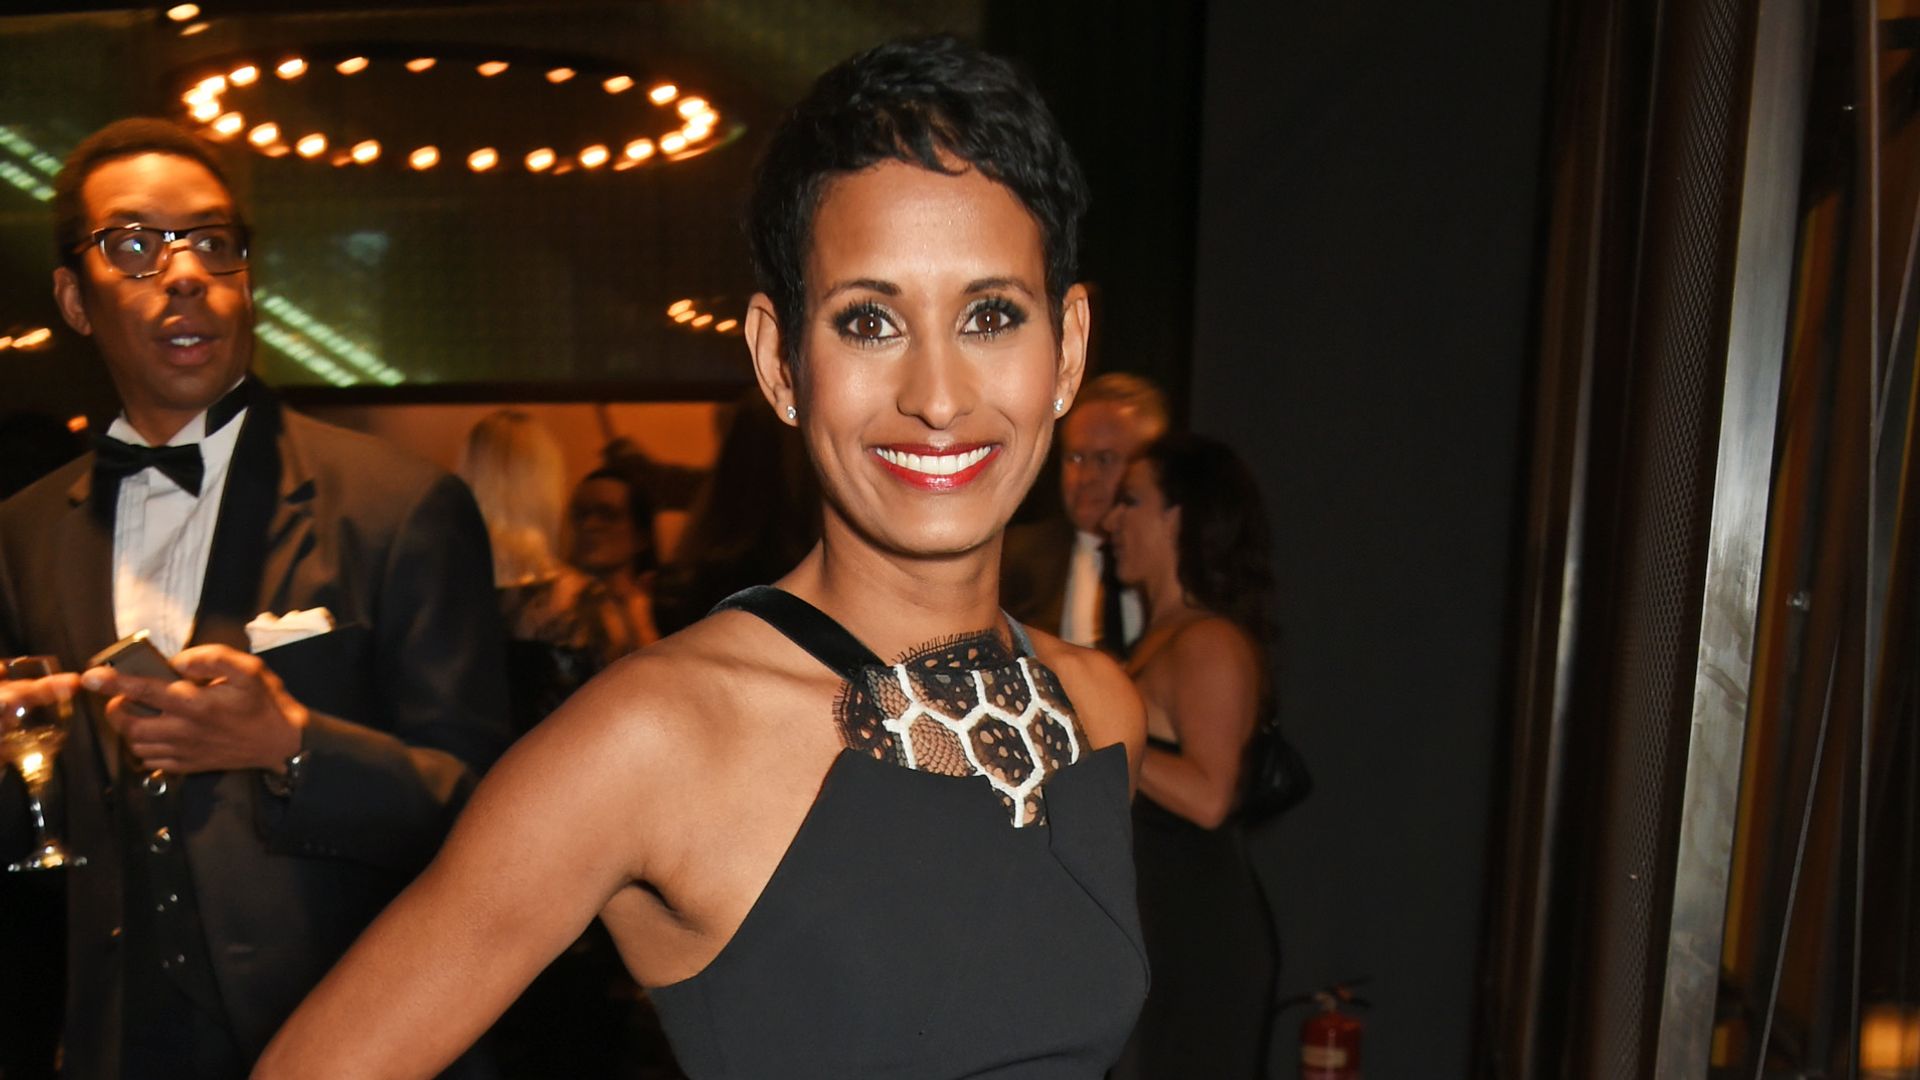 Naga Munchetty attends the National Television Awards in 2017